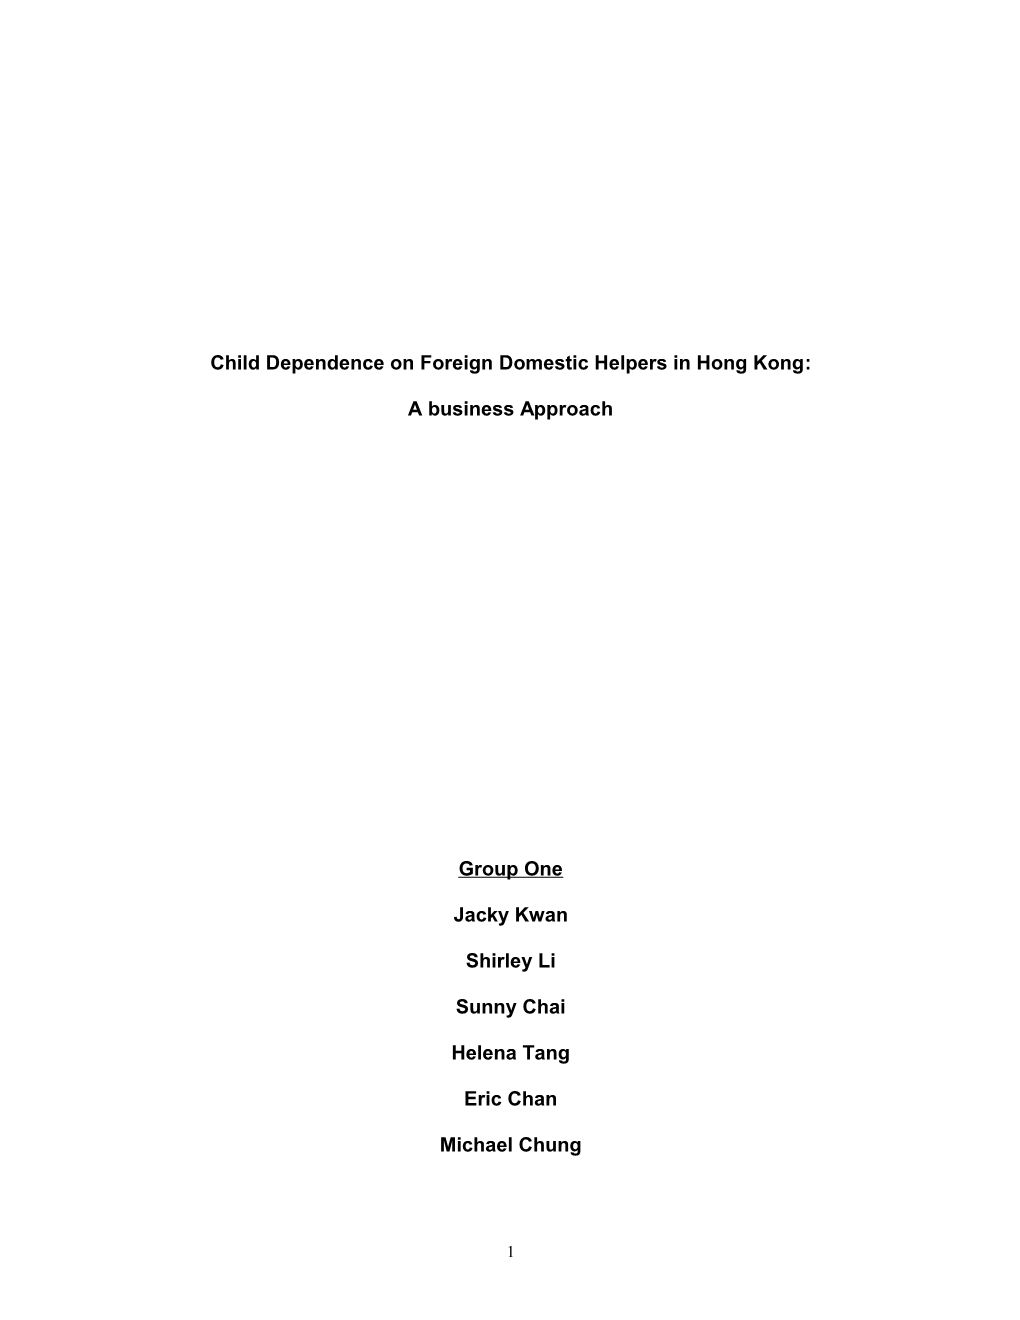 Child Dependence on Foreign Domestic Helpers in Hong Kong